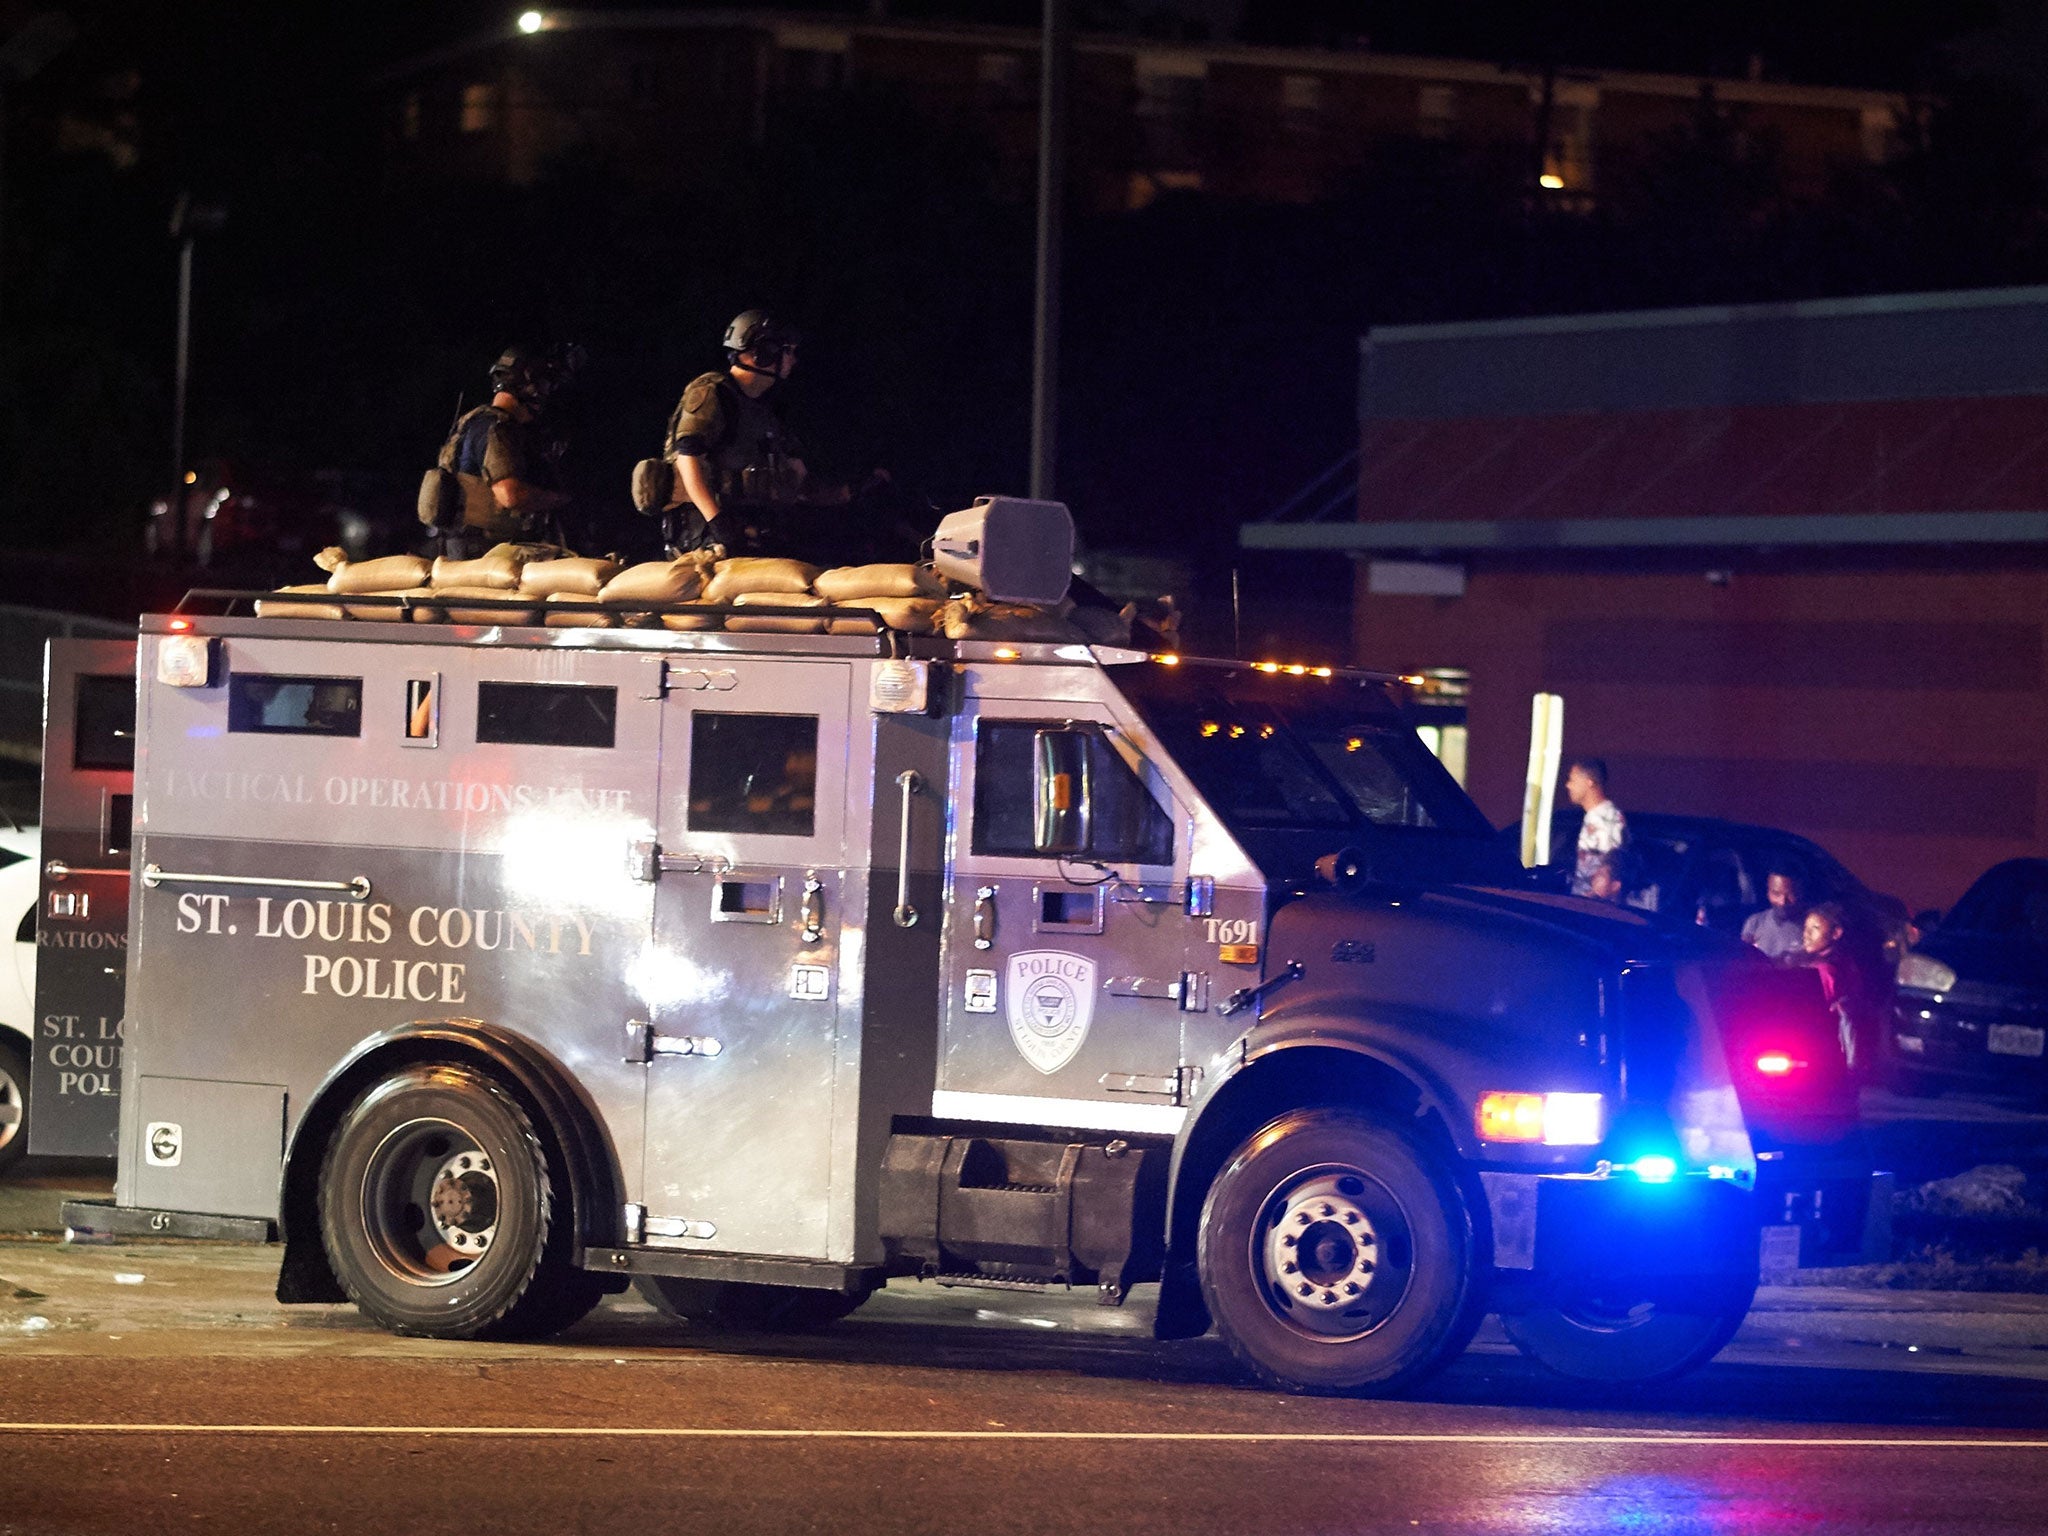 St. Louis County police officers respond in an MRAD vehicle after shots were fired during a protest march on August 9, 2015 on West Florissant Avenue in Ferguson, Missouri